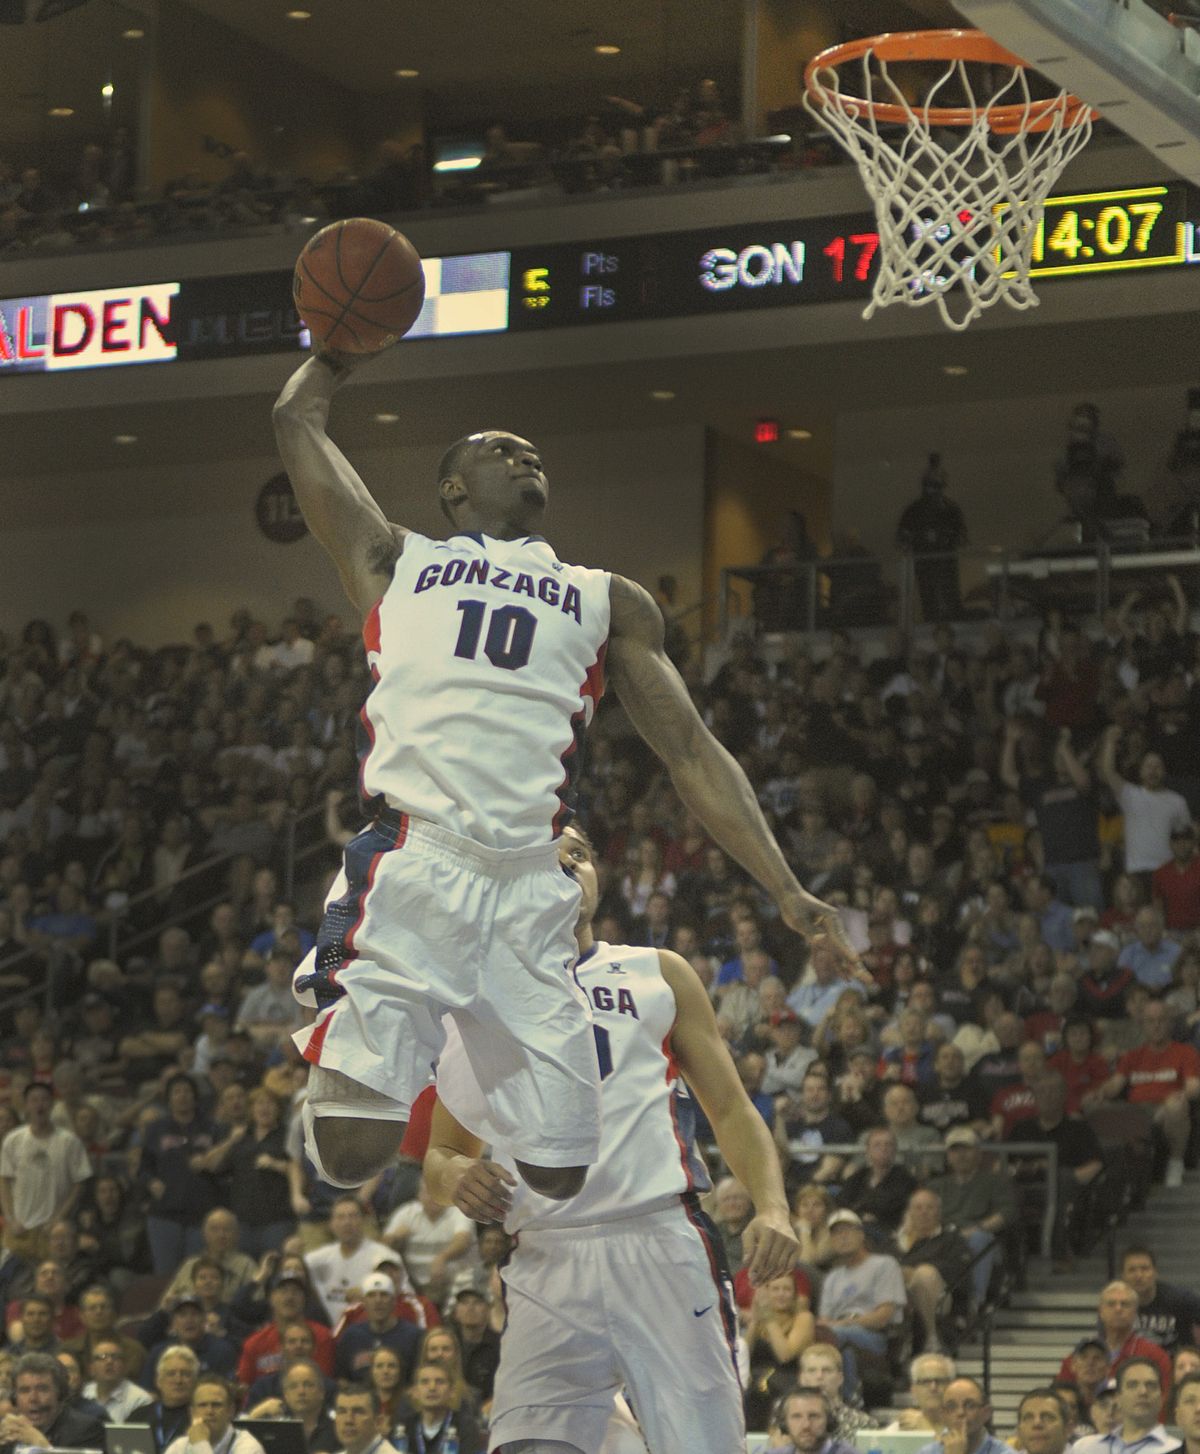 Guy Landry Edi helped Gonzaga get off to a fast start with this dunk early in the first half against BYU. (Christopher Anderson)